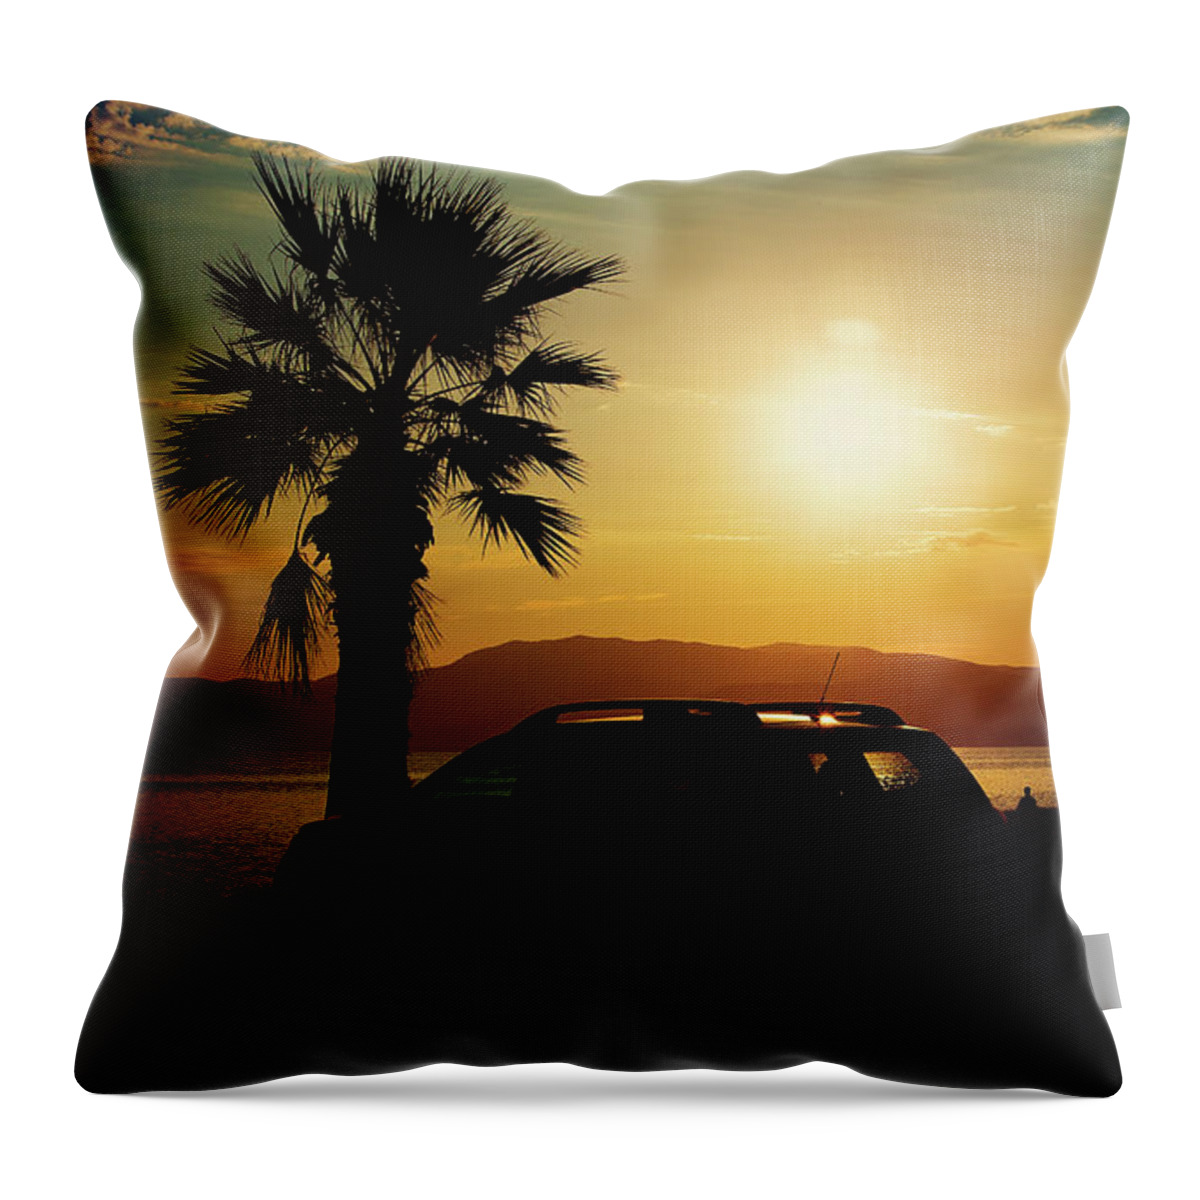 Landscape Throw Pillow featuring the photograph Summer Life by Milena Ilieva